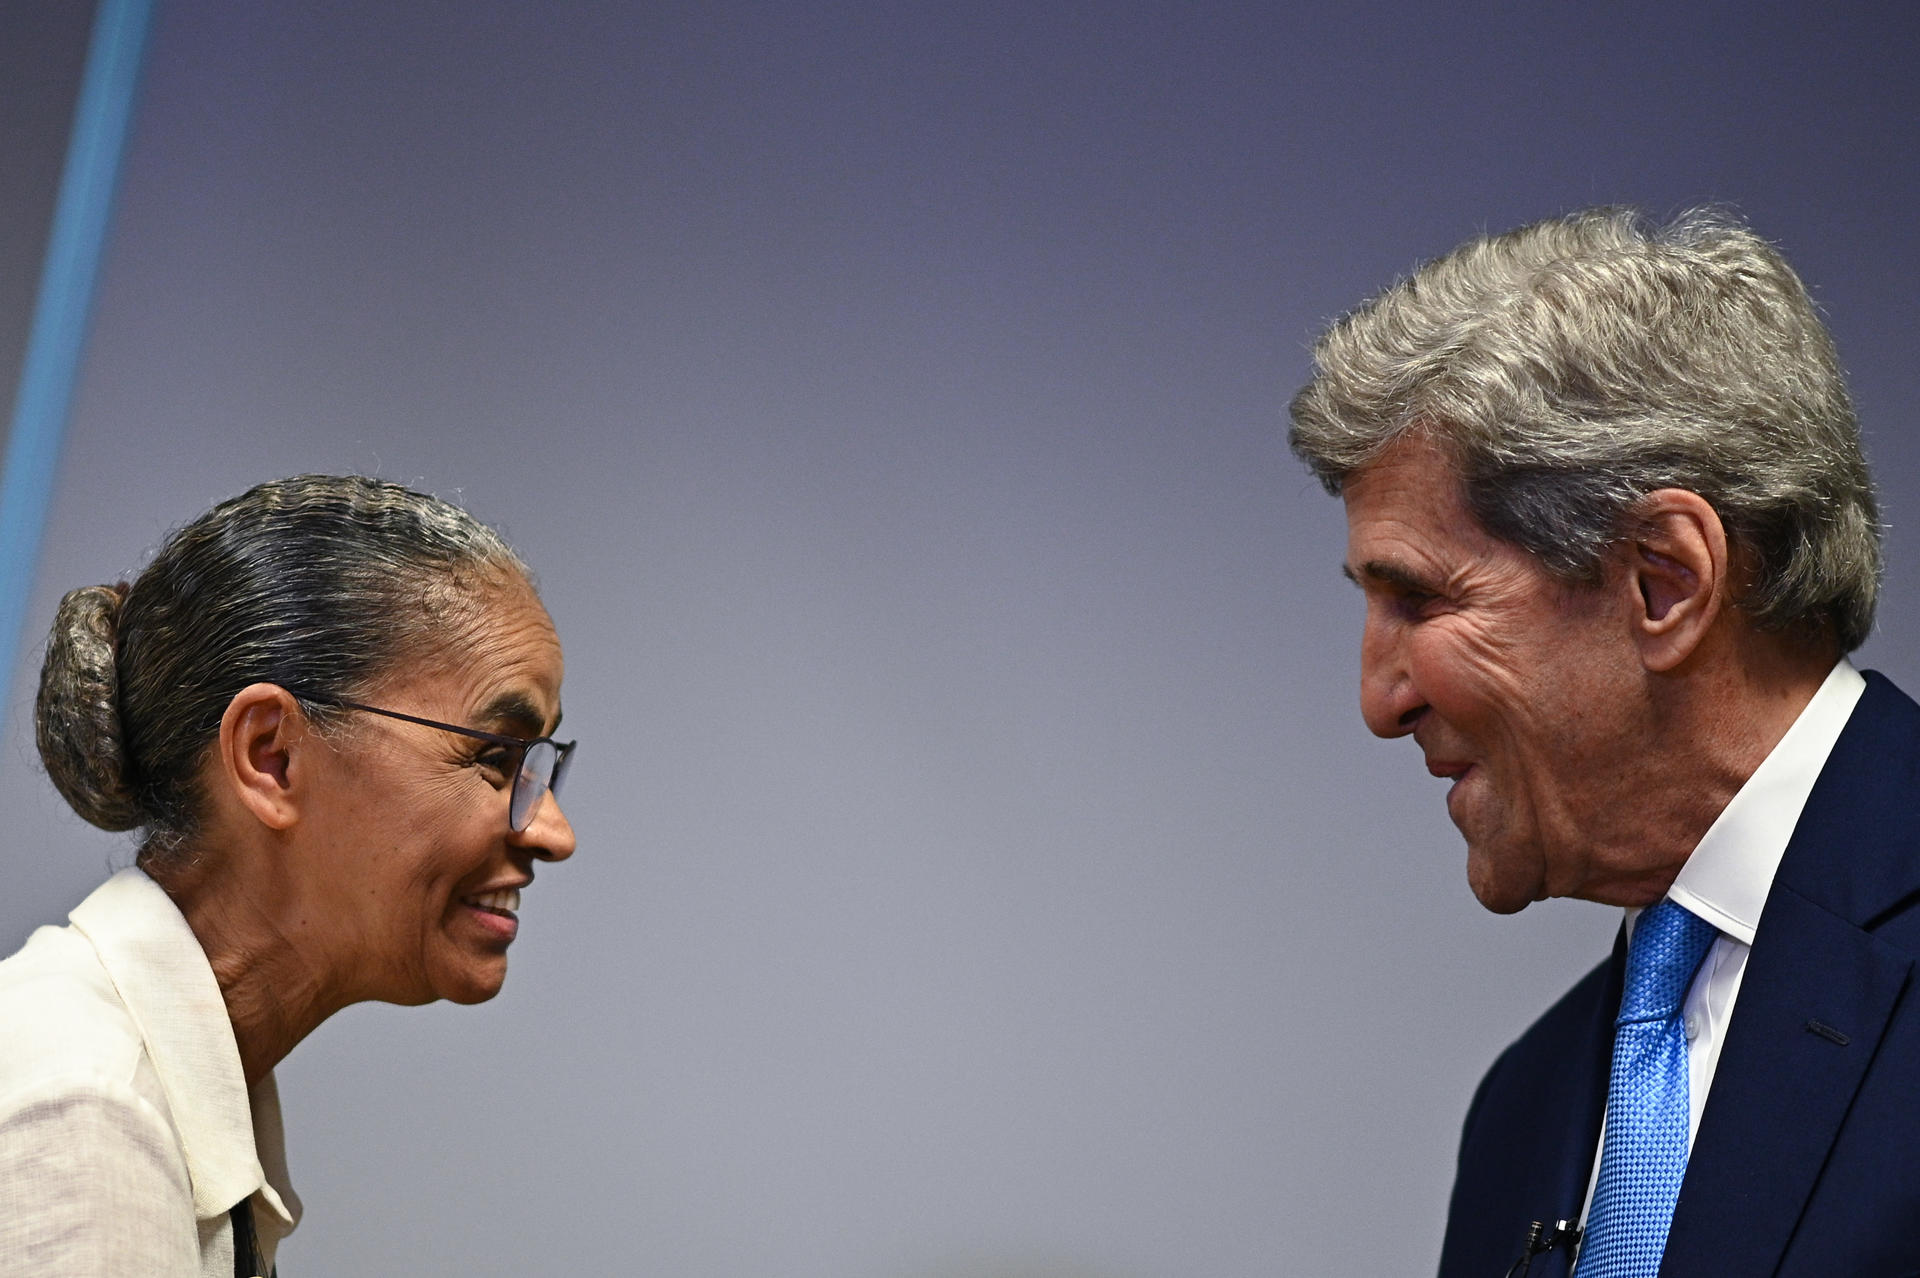 John Kerry, the United States' special presidential envoy for climate, met with Brazilian Environment Minister Marina Silva on 28 February 2023 in Brasilia, Brazil. In remarks to reporters, Kerry reaffirmed President Joe Biden's commitment to protecting the Amazon rainforest and pledged to seek out the necessary funding to assist Brazil in that effort. EFE/Andre Borges